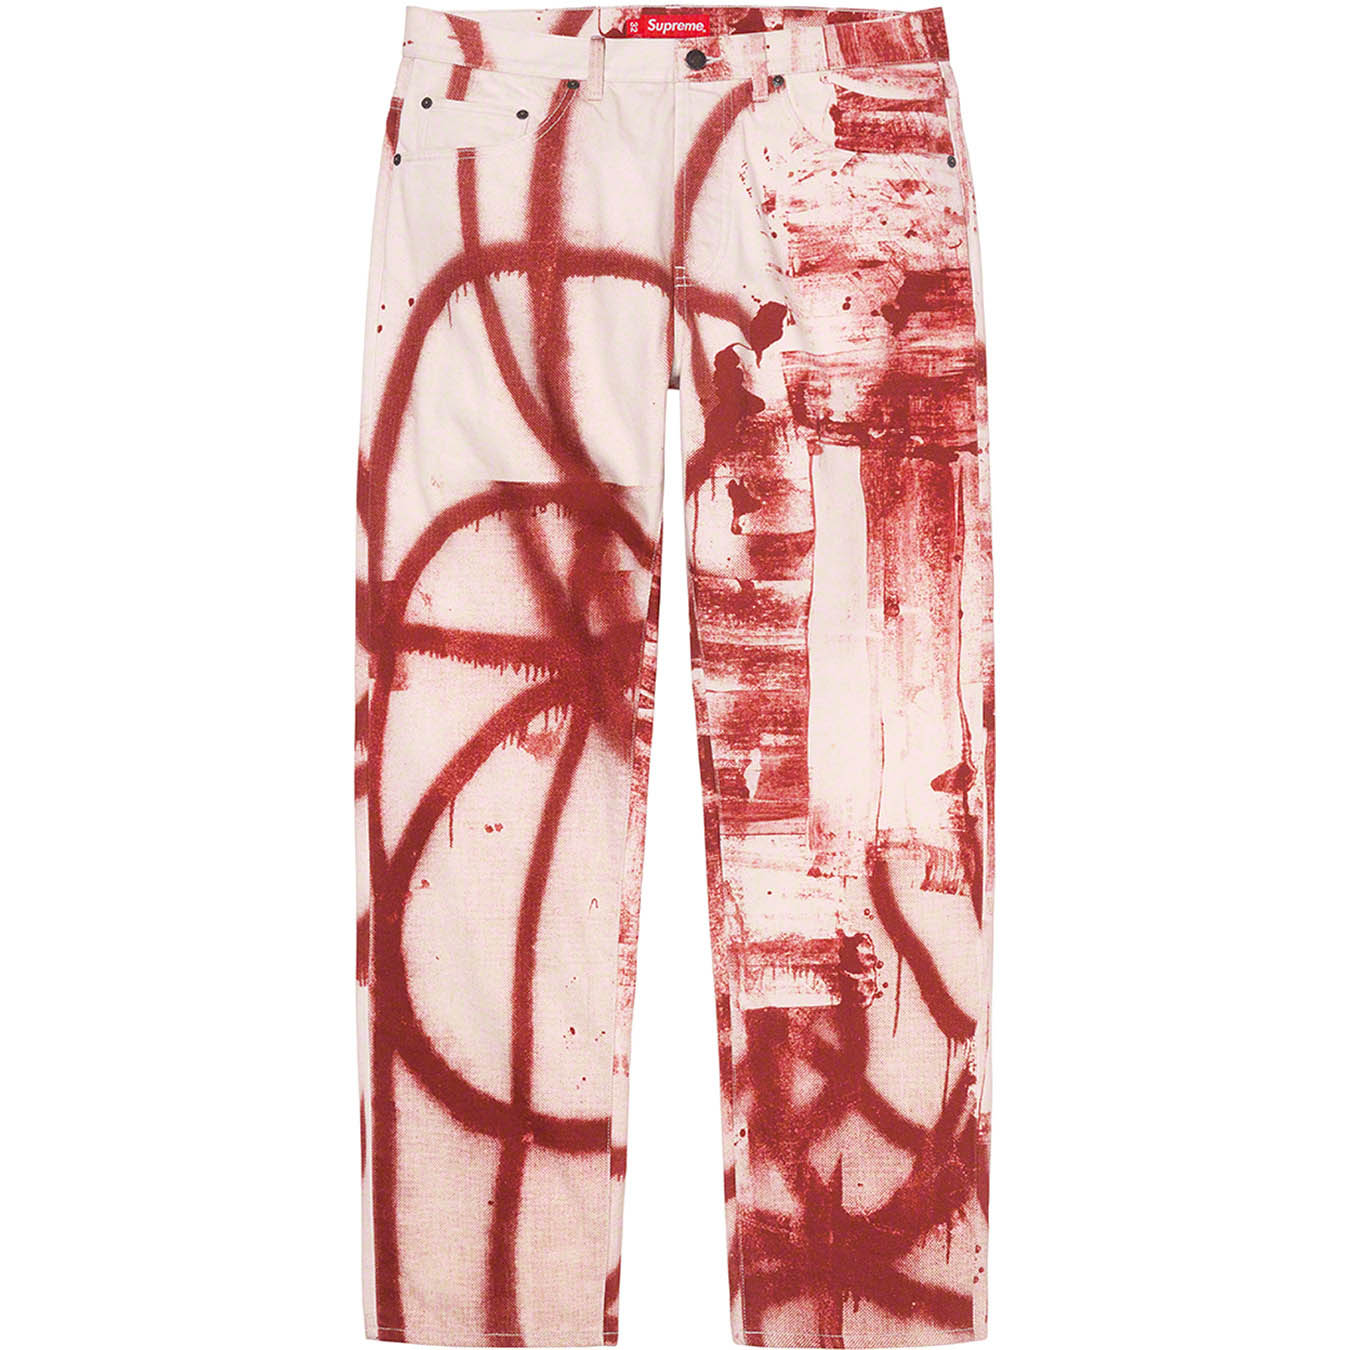 supreme christopher wool jeans 30 インチ-